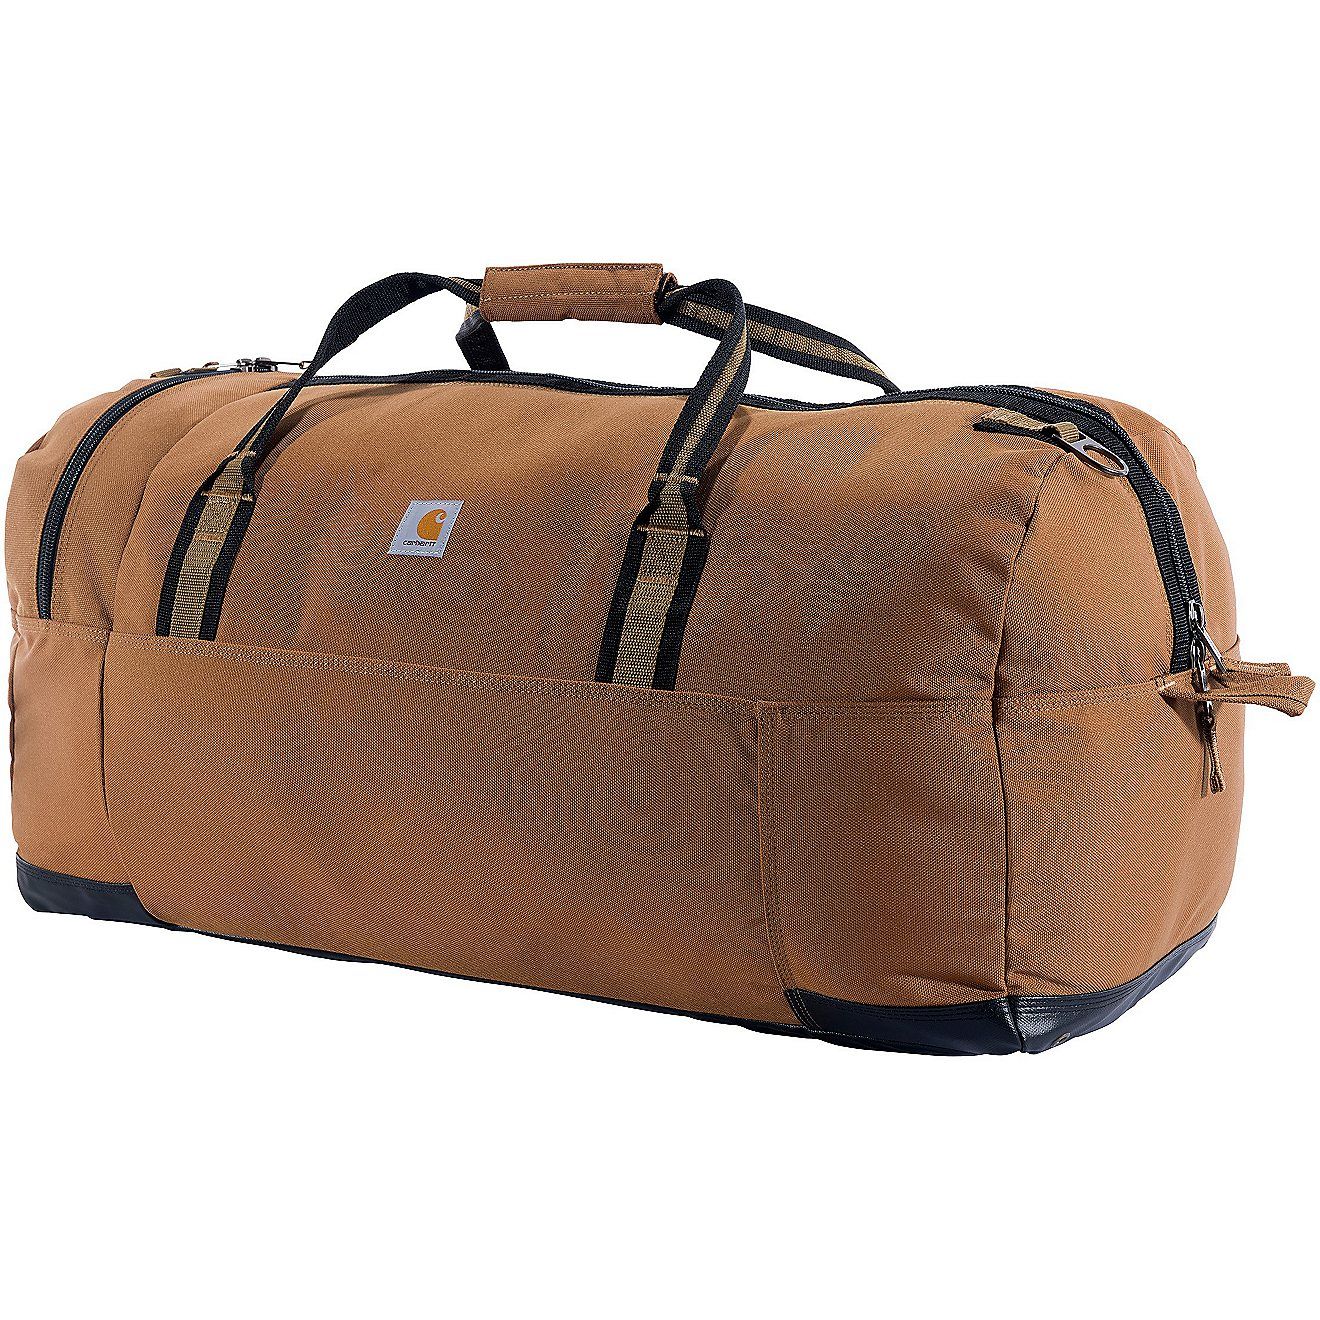 Carhartt Classic 55L Duffel Bag | Free Shipping at Academy | Academy Sports + Outdoors